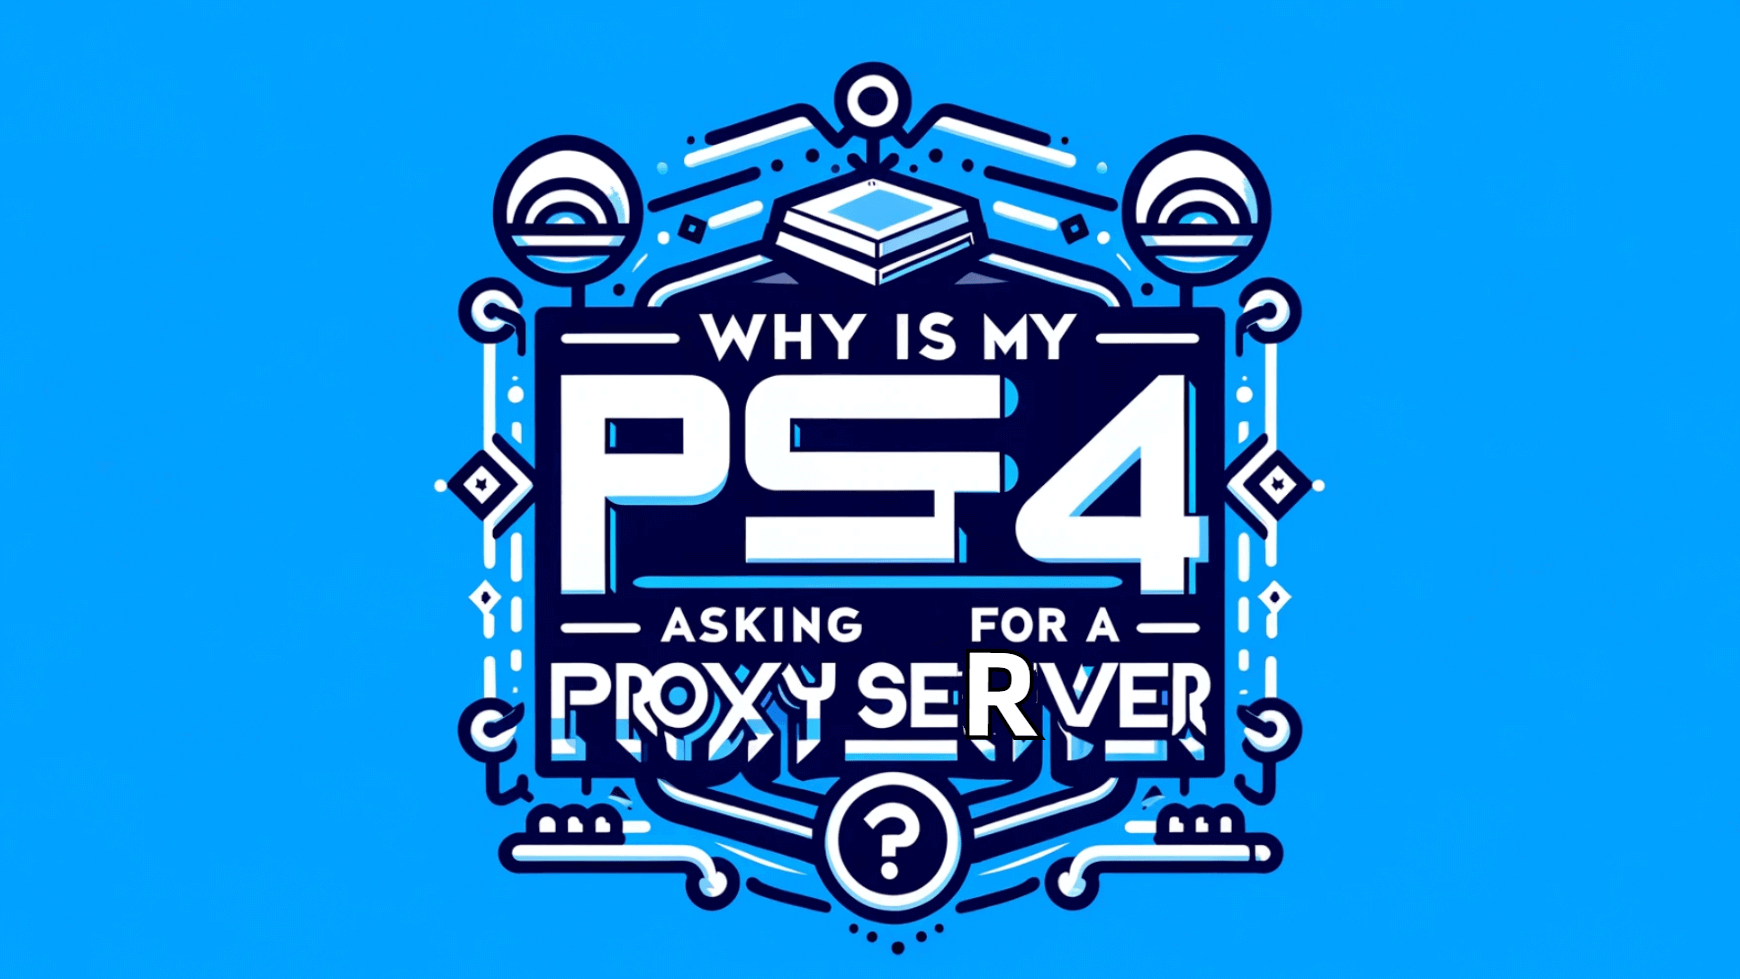 Reasons Your PS4 Asks for a Proxy Server